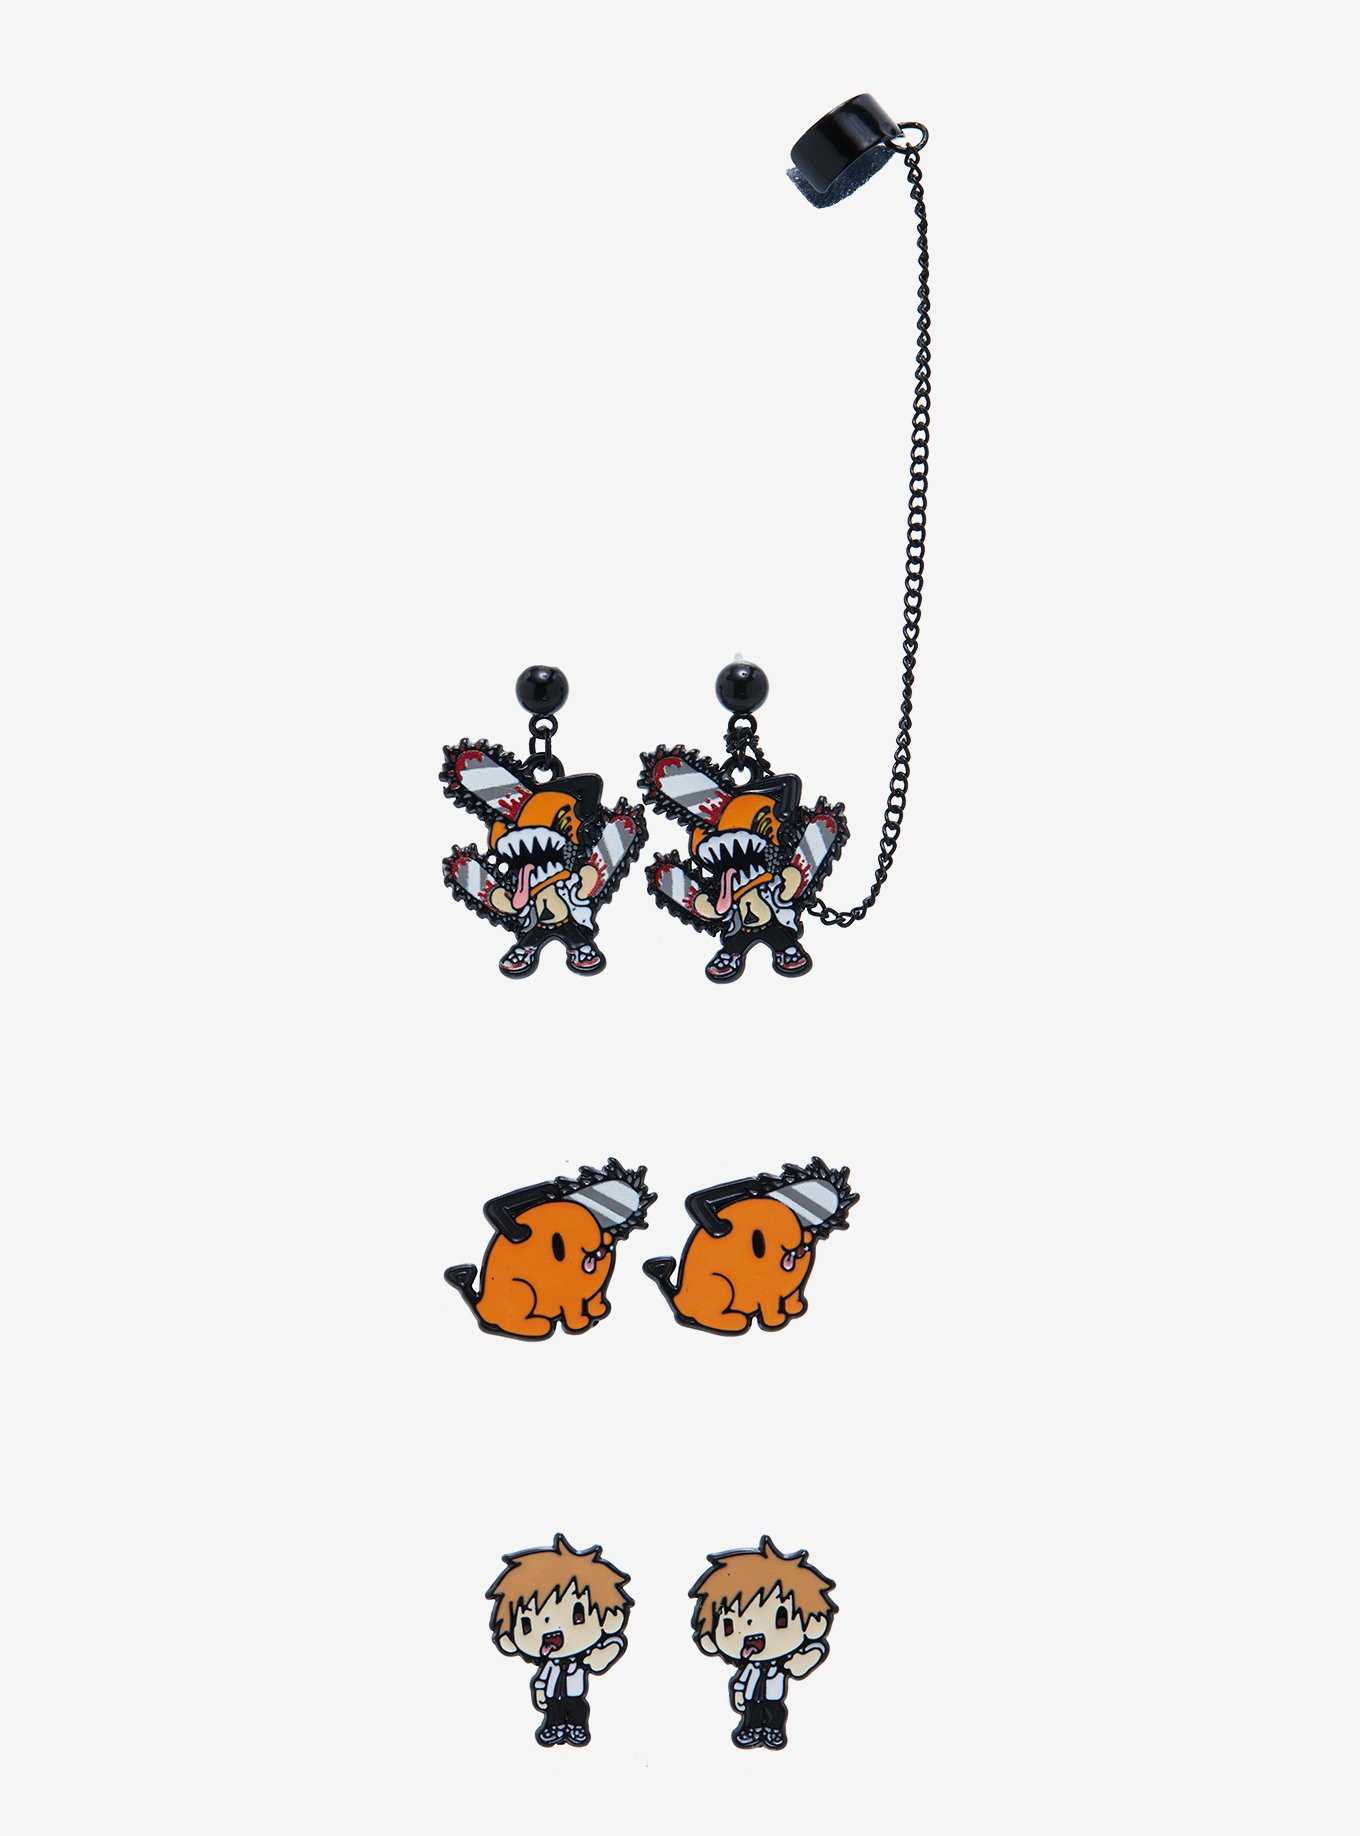 Chainsaw Man Character Stud & Cuff Earring Set, , hi-res